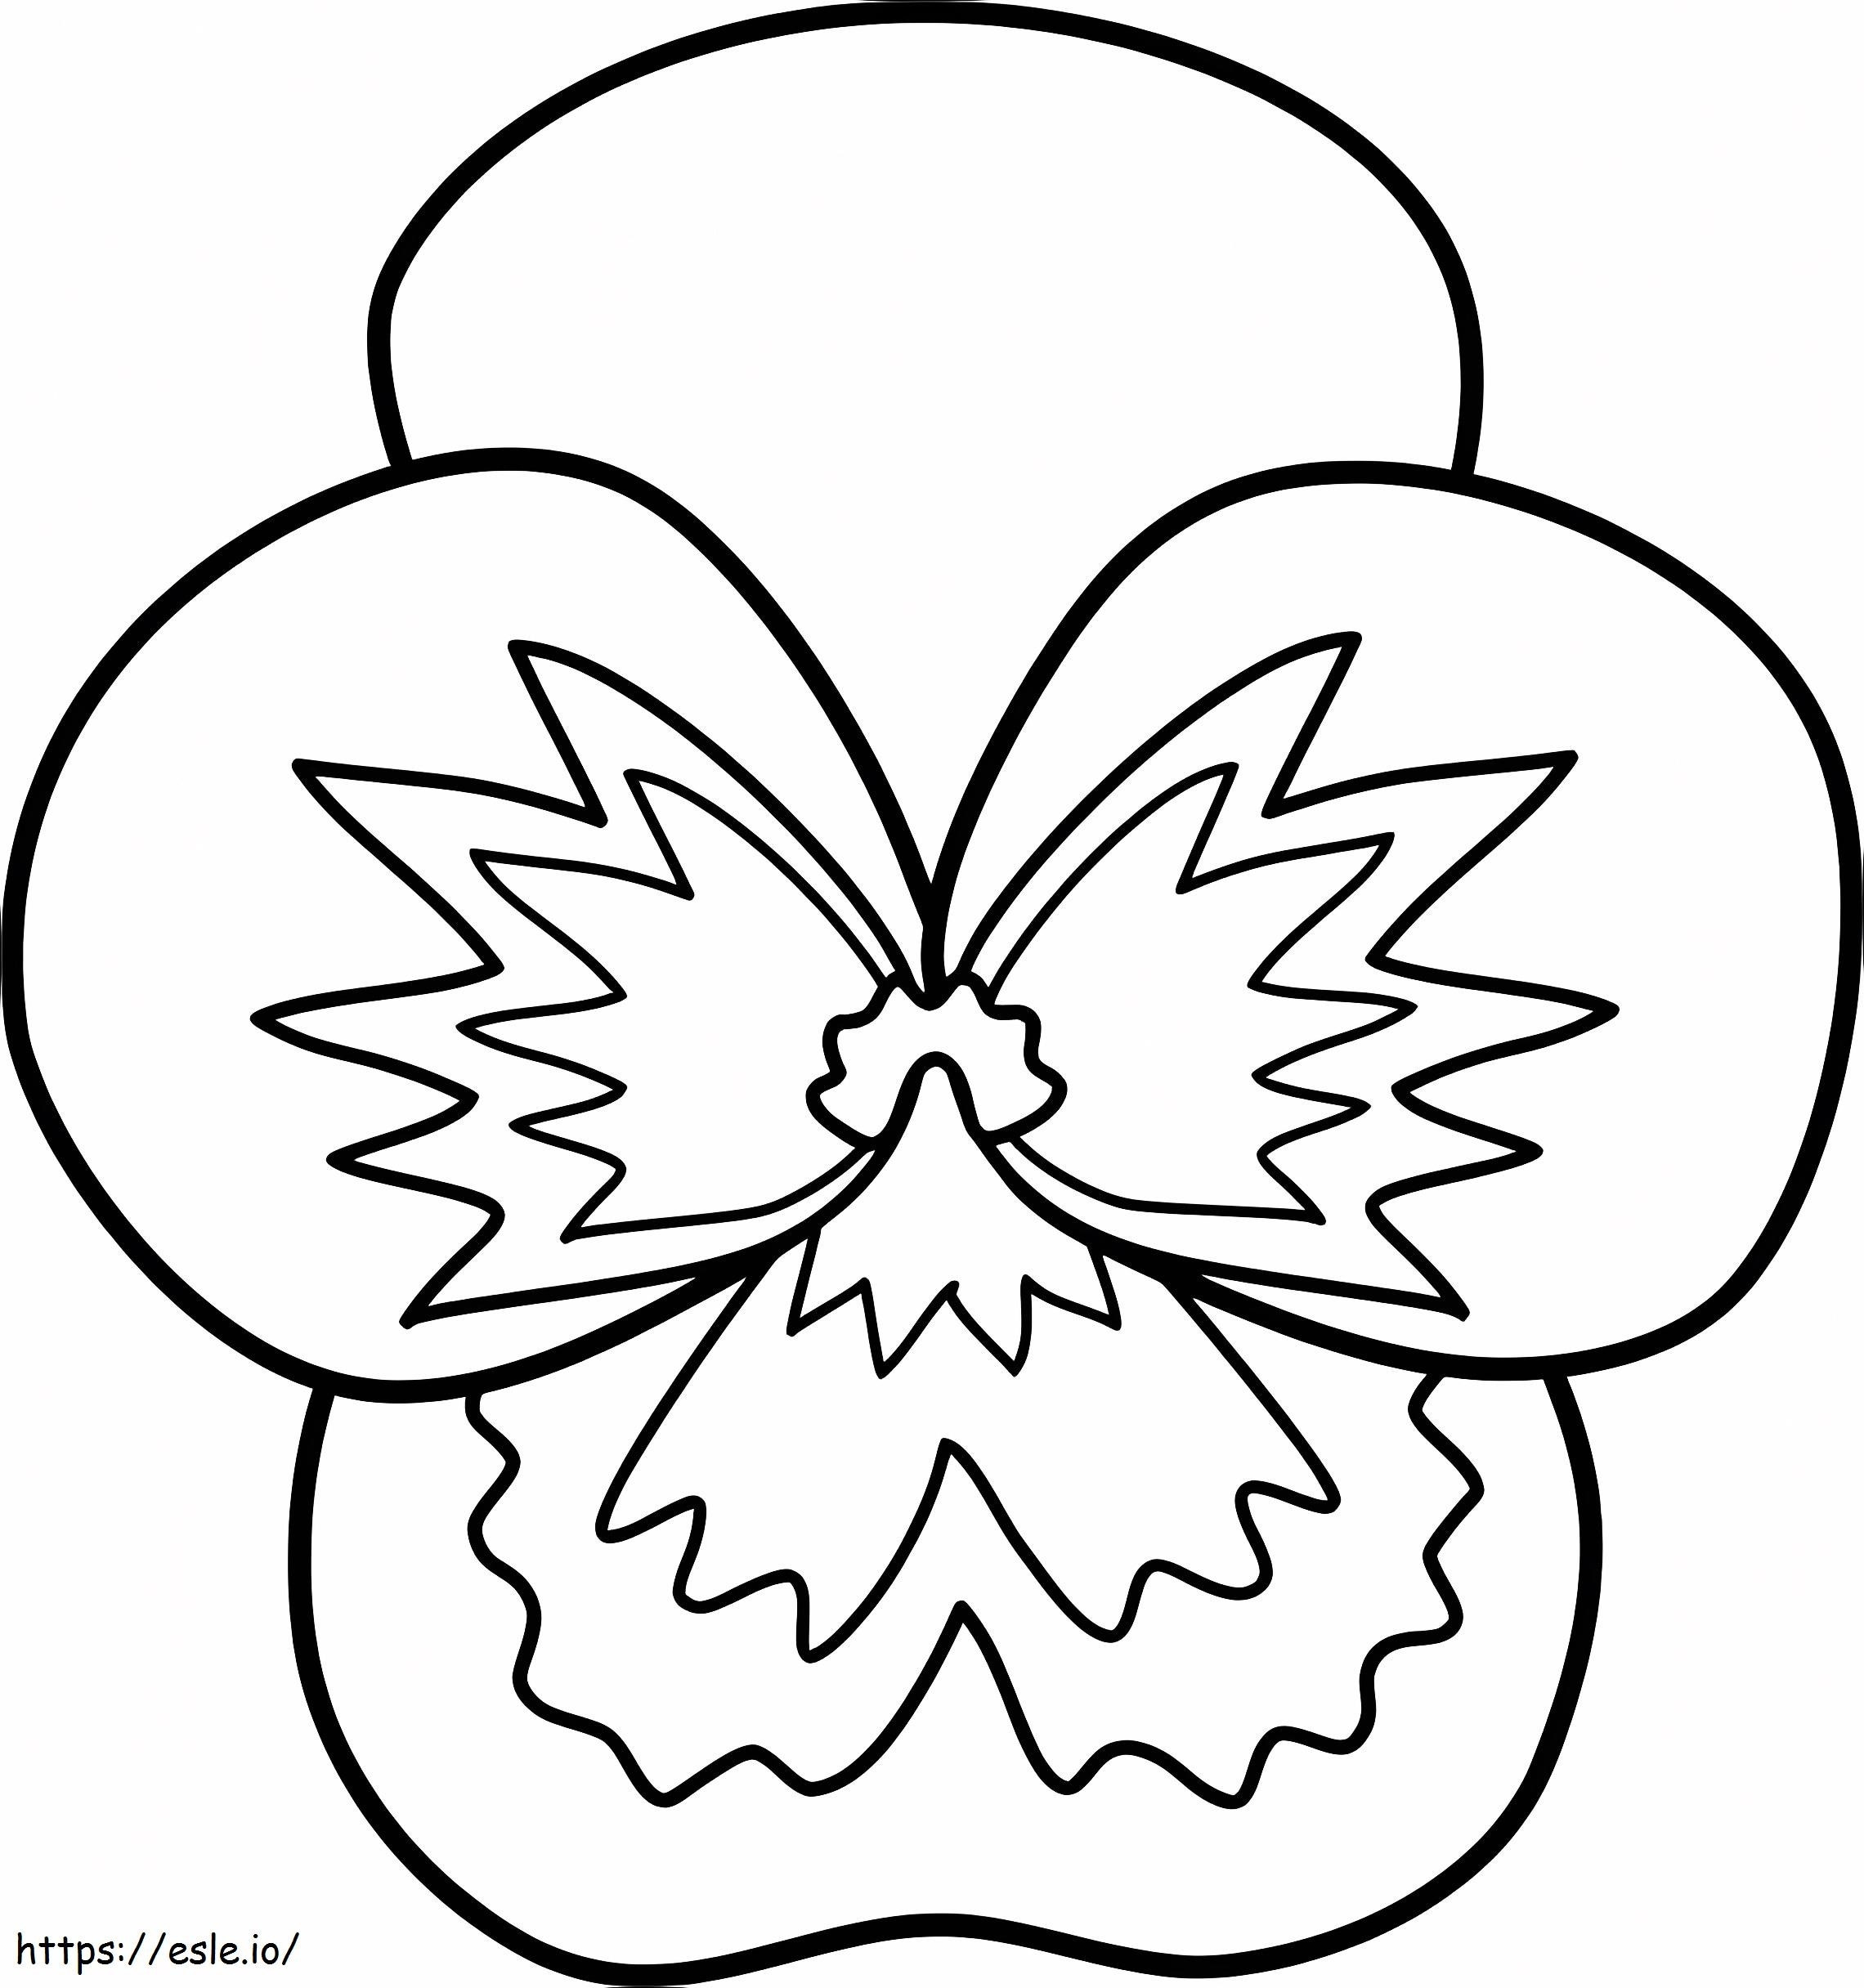 Easy Pansy coloring page